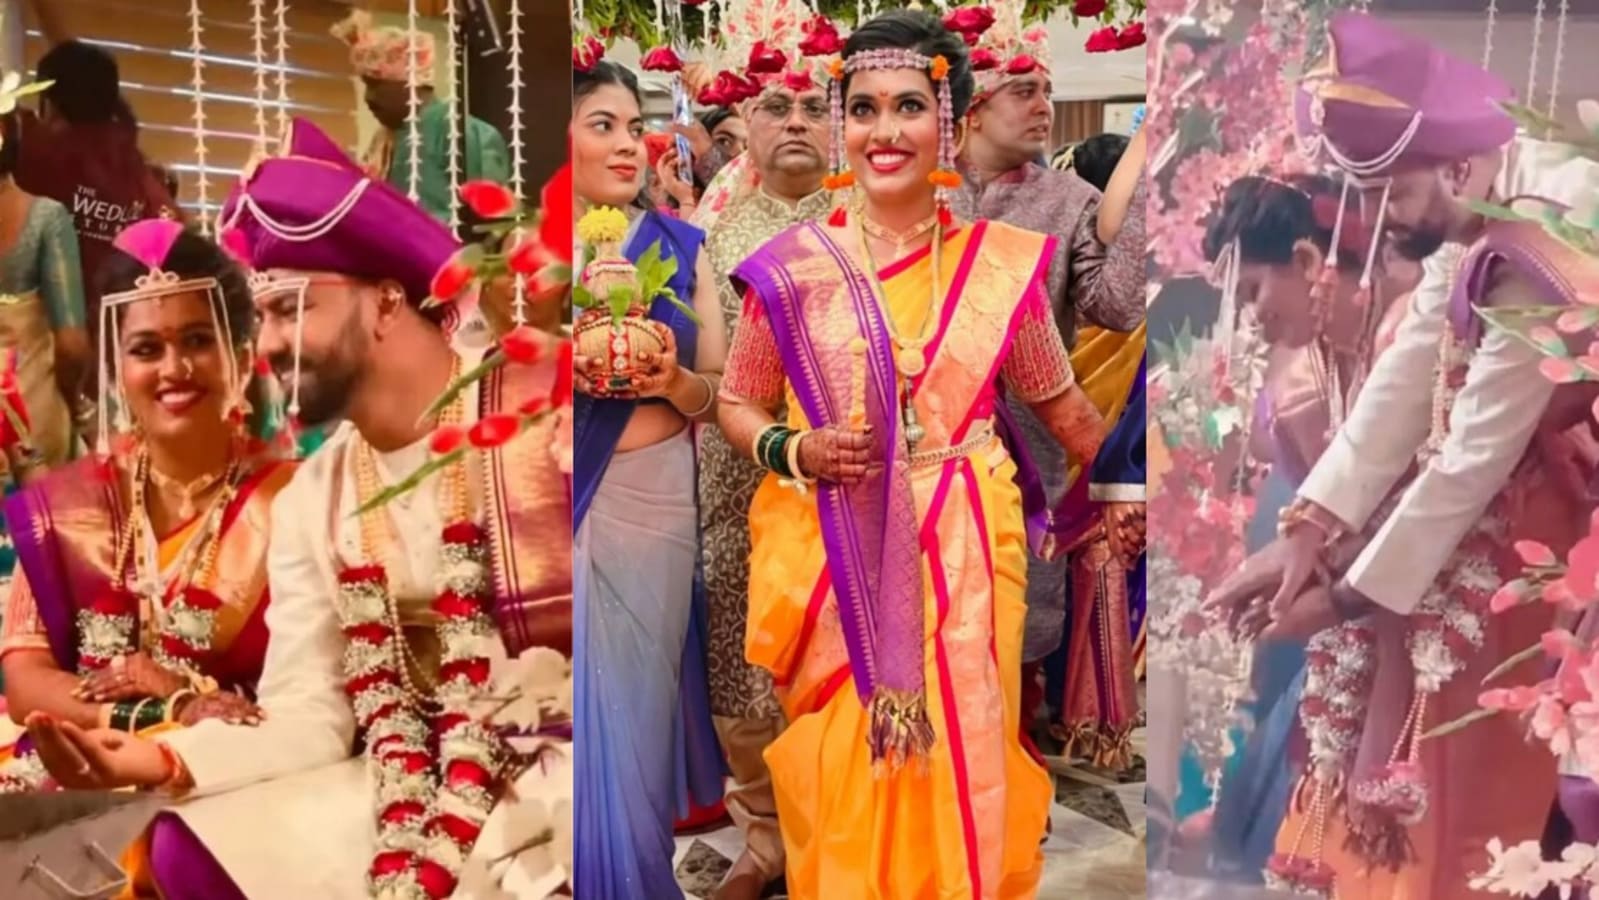 Indian Idol 12 fame Sayli Kamble ties the knot with boyfriend Dhaval in a Maharashtrian ceremony. See pics